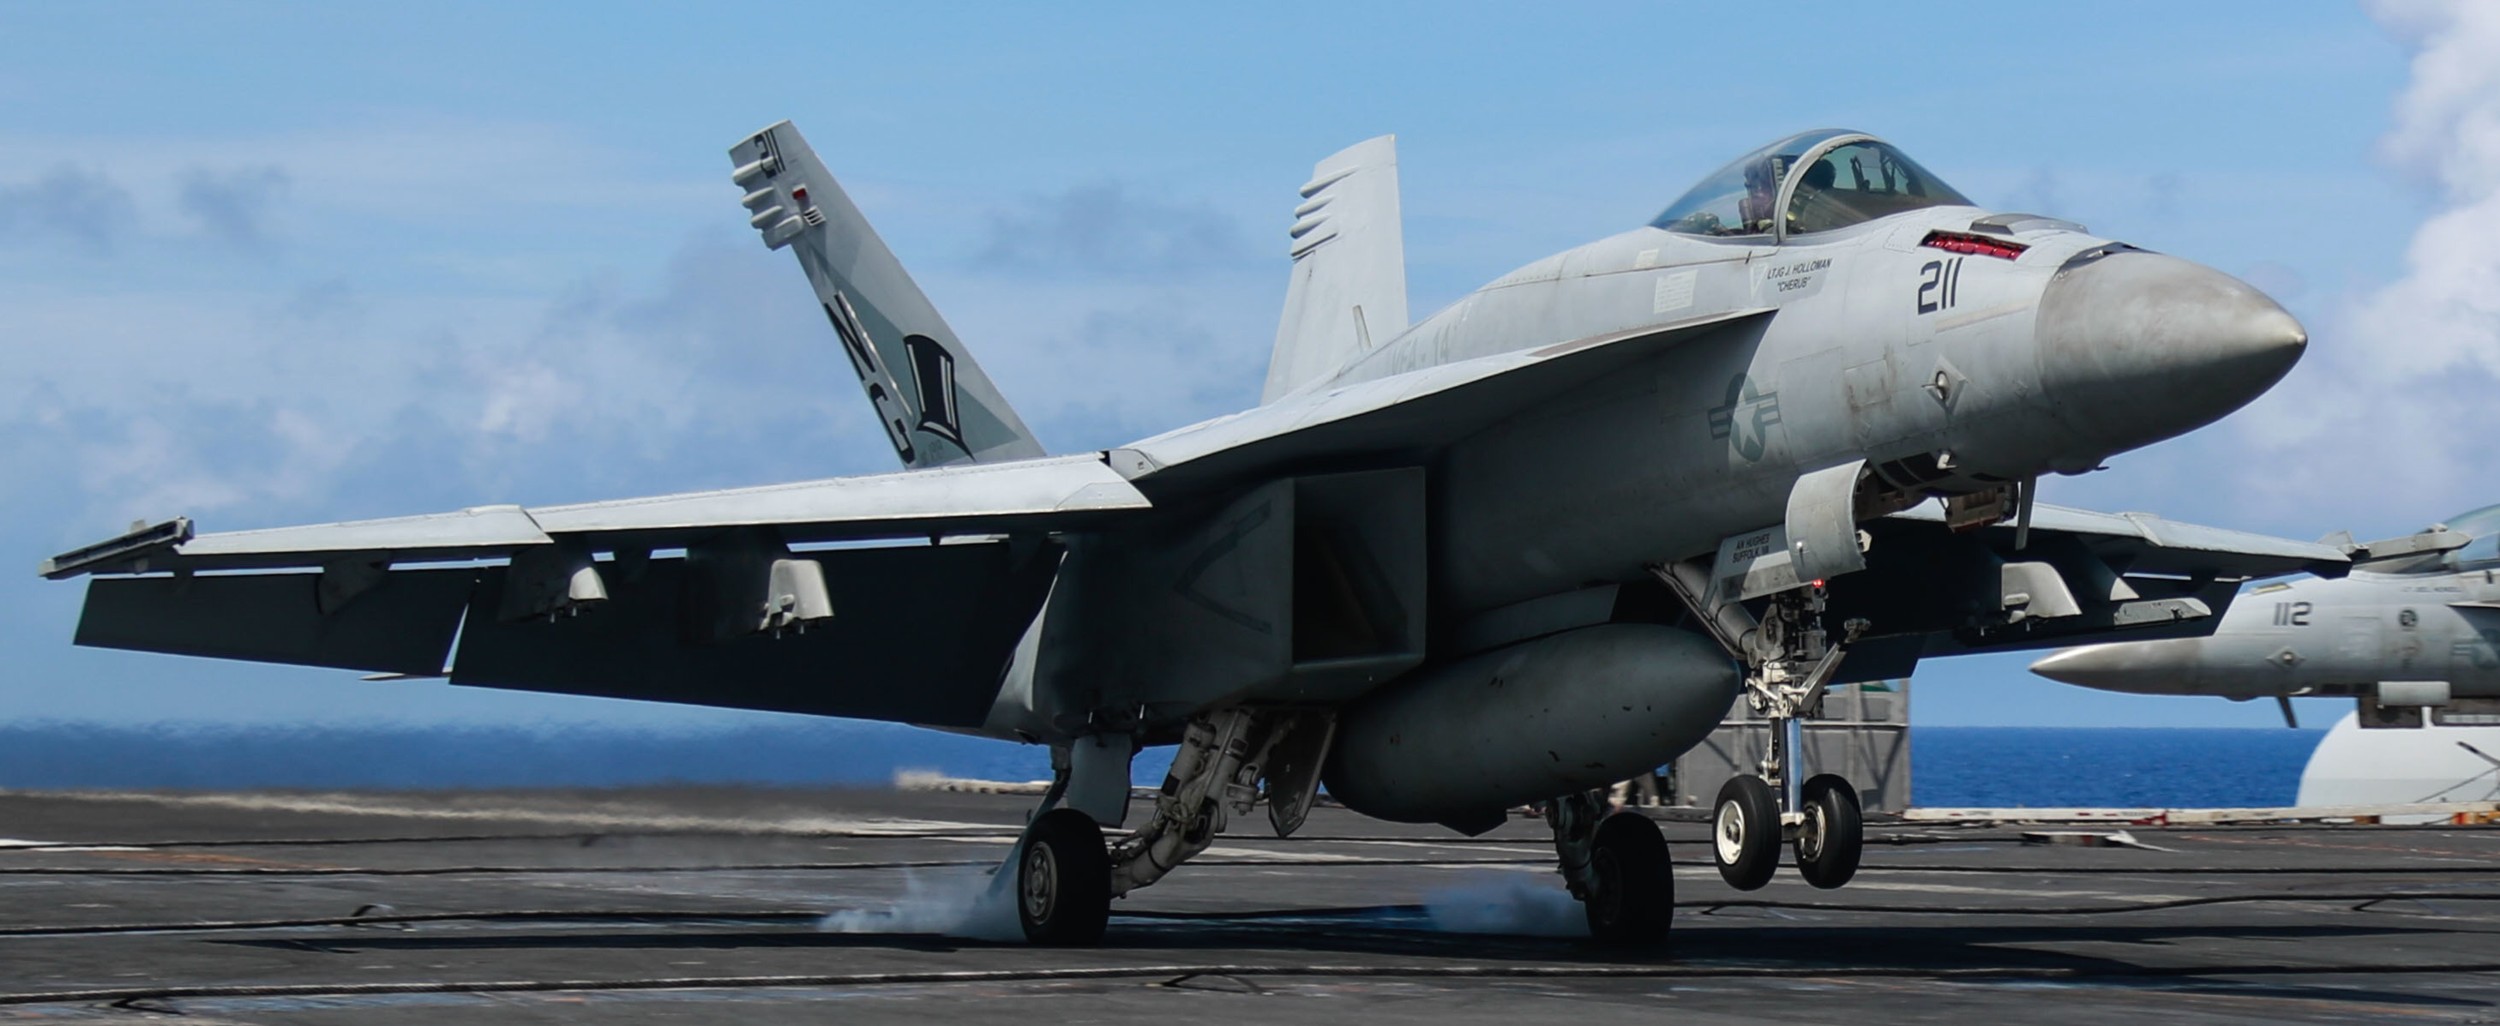 vfa-14 tophatters strike fighter squadron f/a-18e super hornet cvn-72 uss abraham lincoln cvw-9 us navy 87